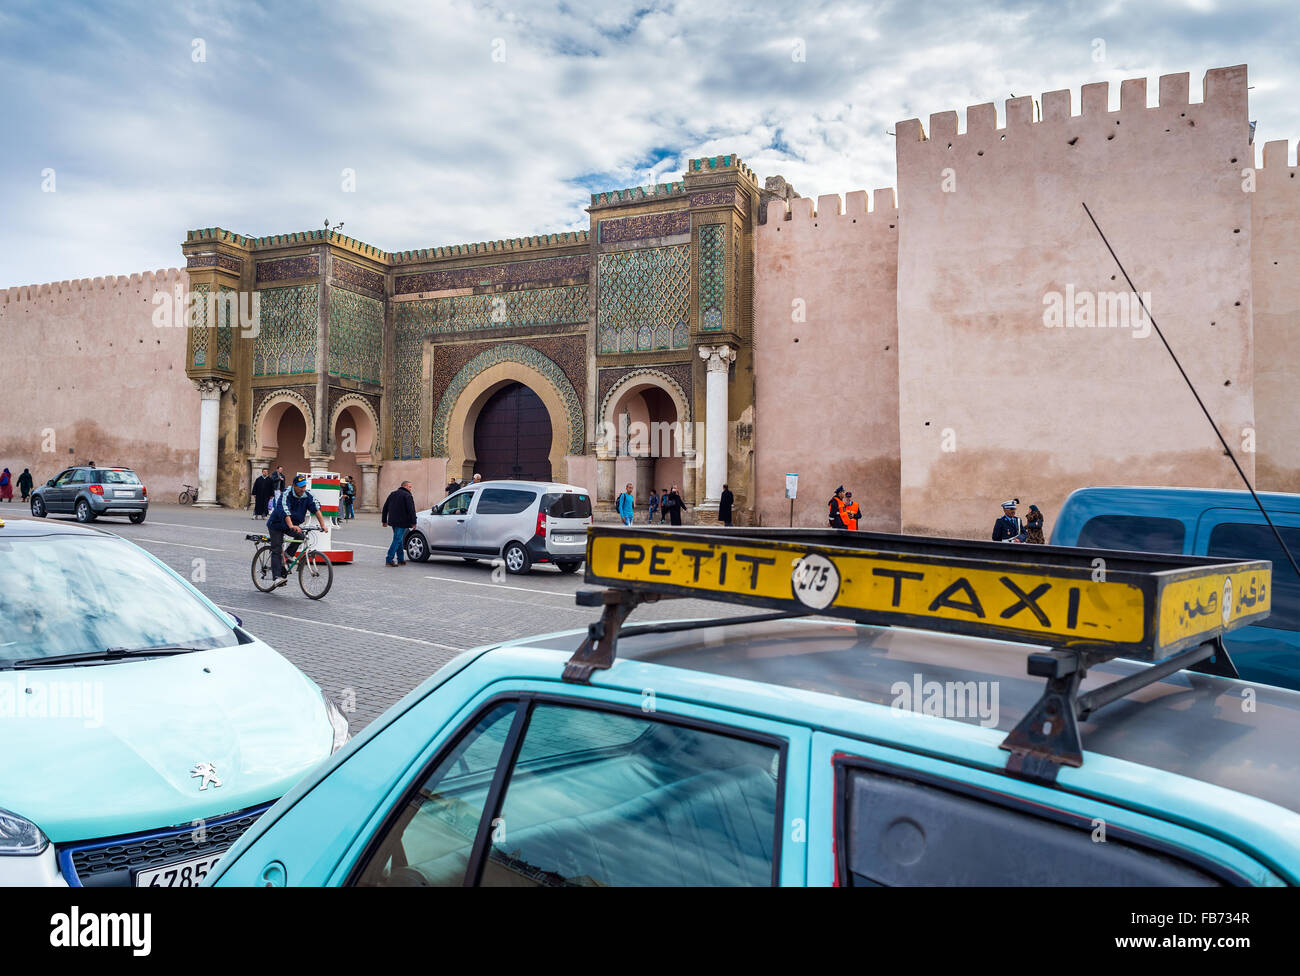 Taxi rank with Petit Taxis front of The Bab el Mansour in medina of Meknes. Morocco. Stock Photo